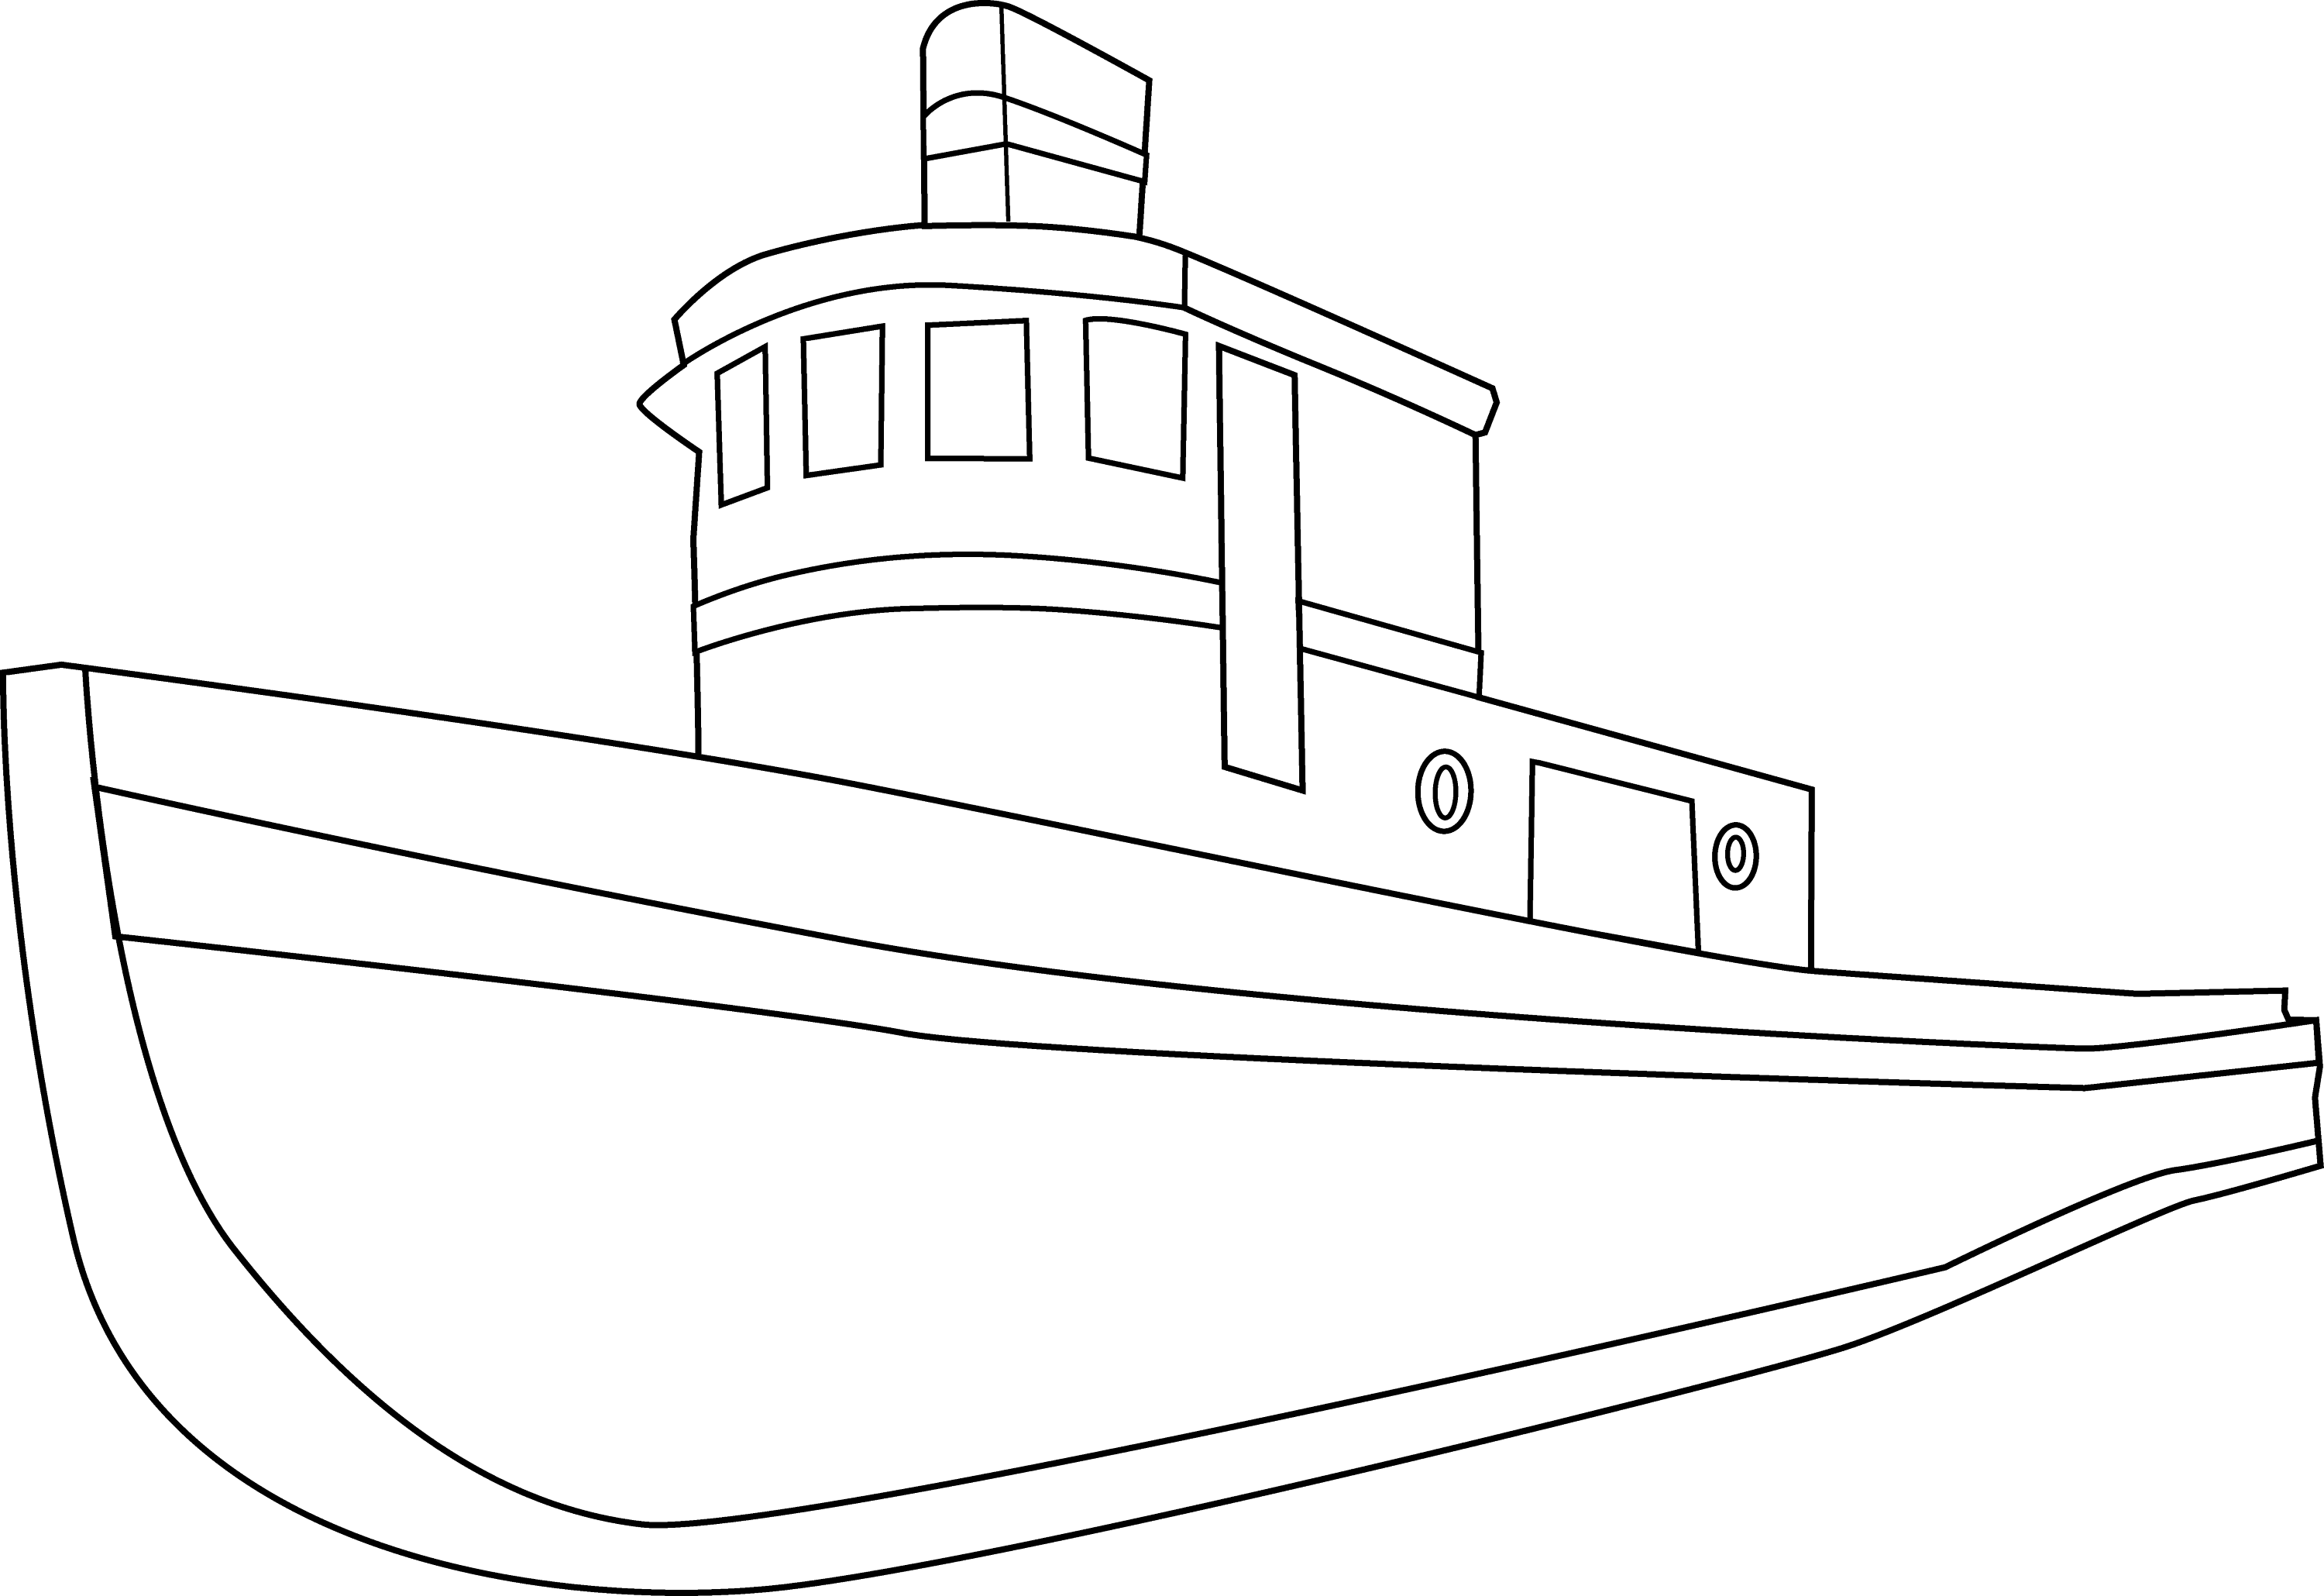 boat clipart black and white - photo #15